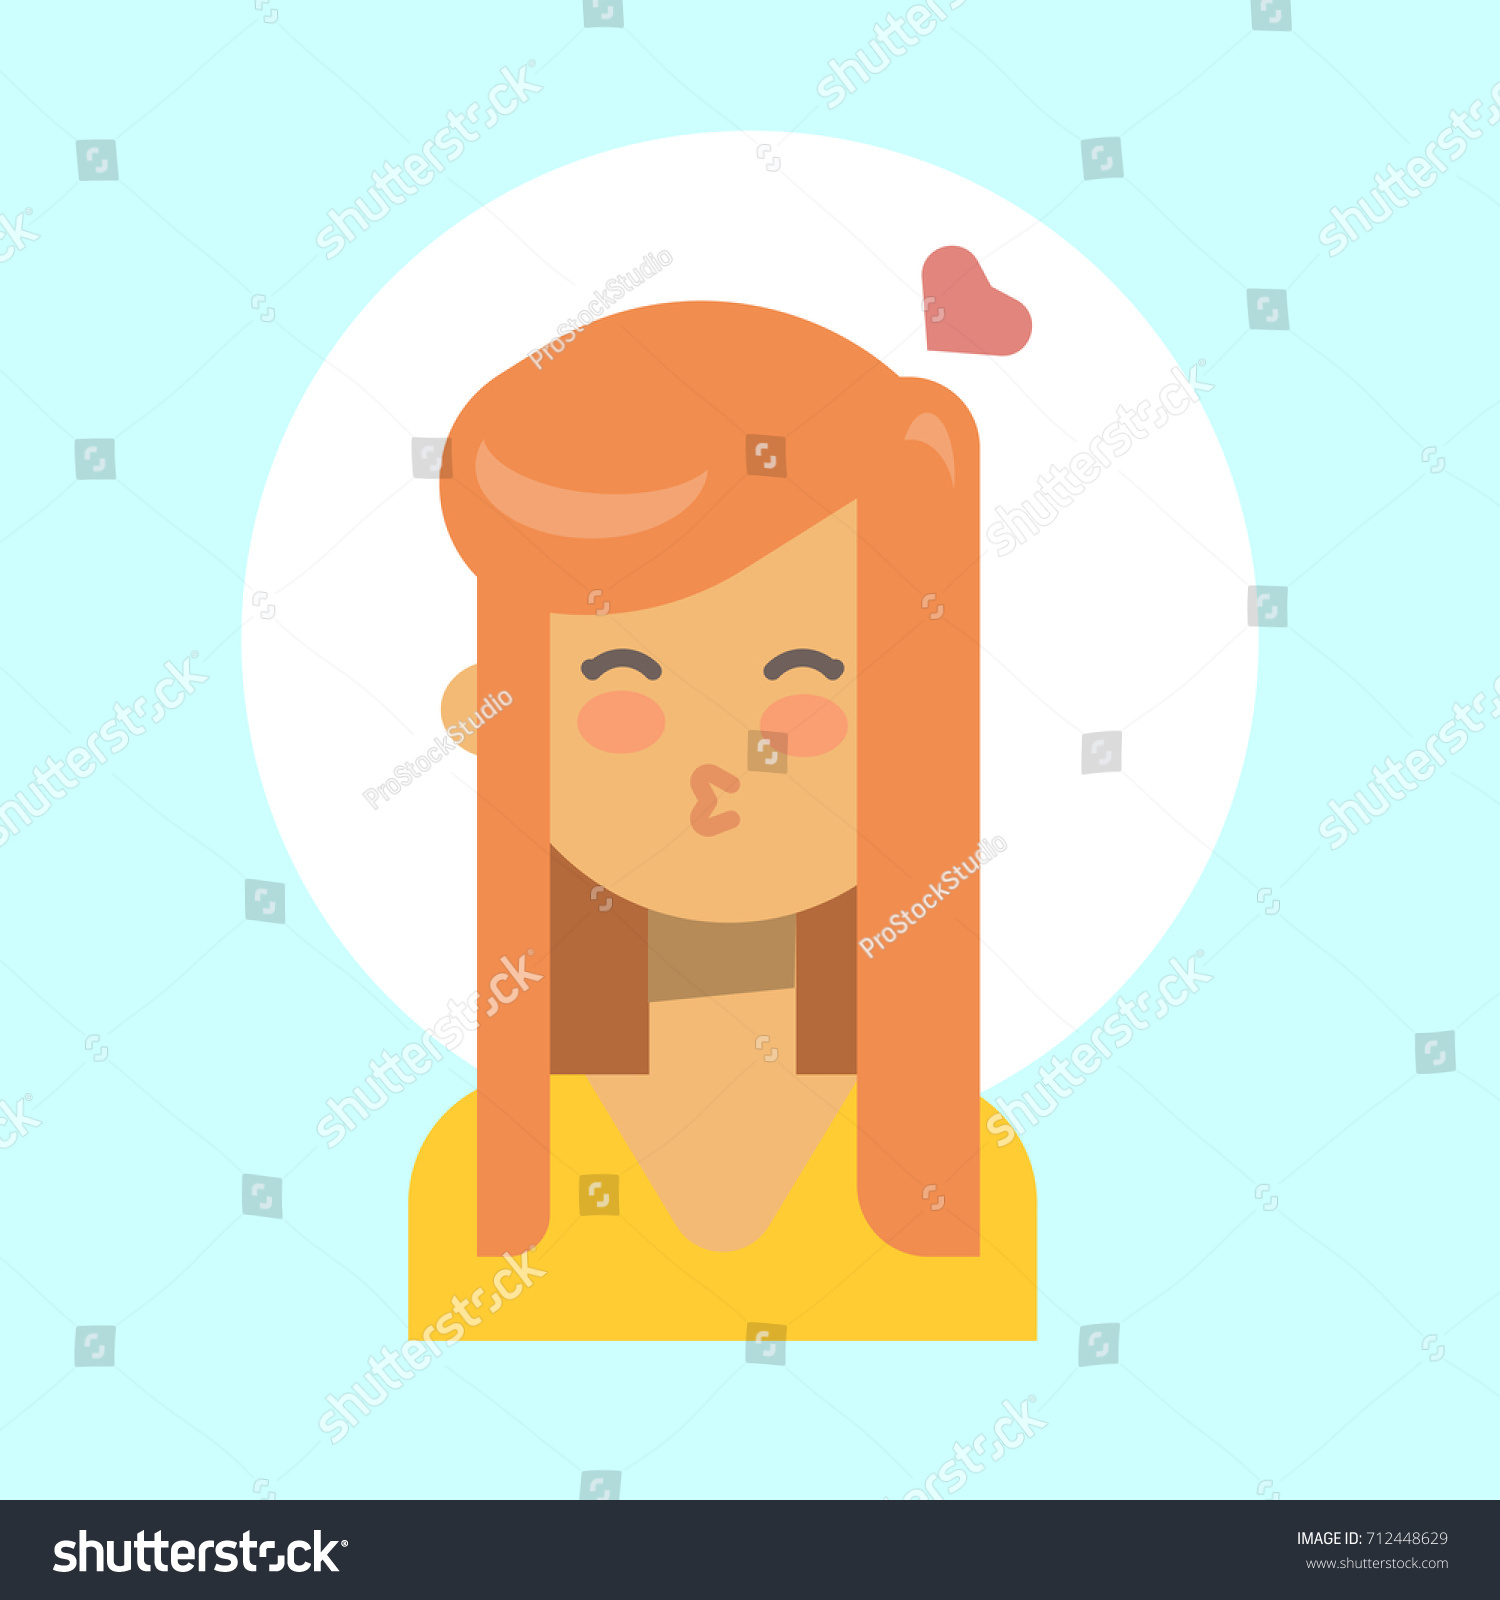 Female Blow Kiss Emotion Profile Icon Stock Vector Royalty Free 712448629 Shutterstock